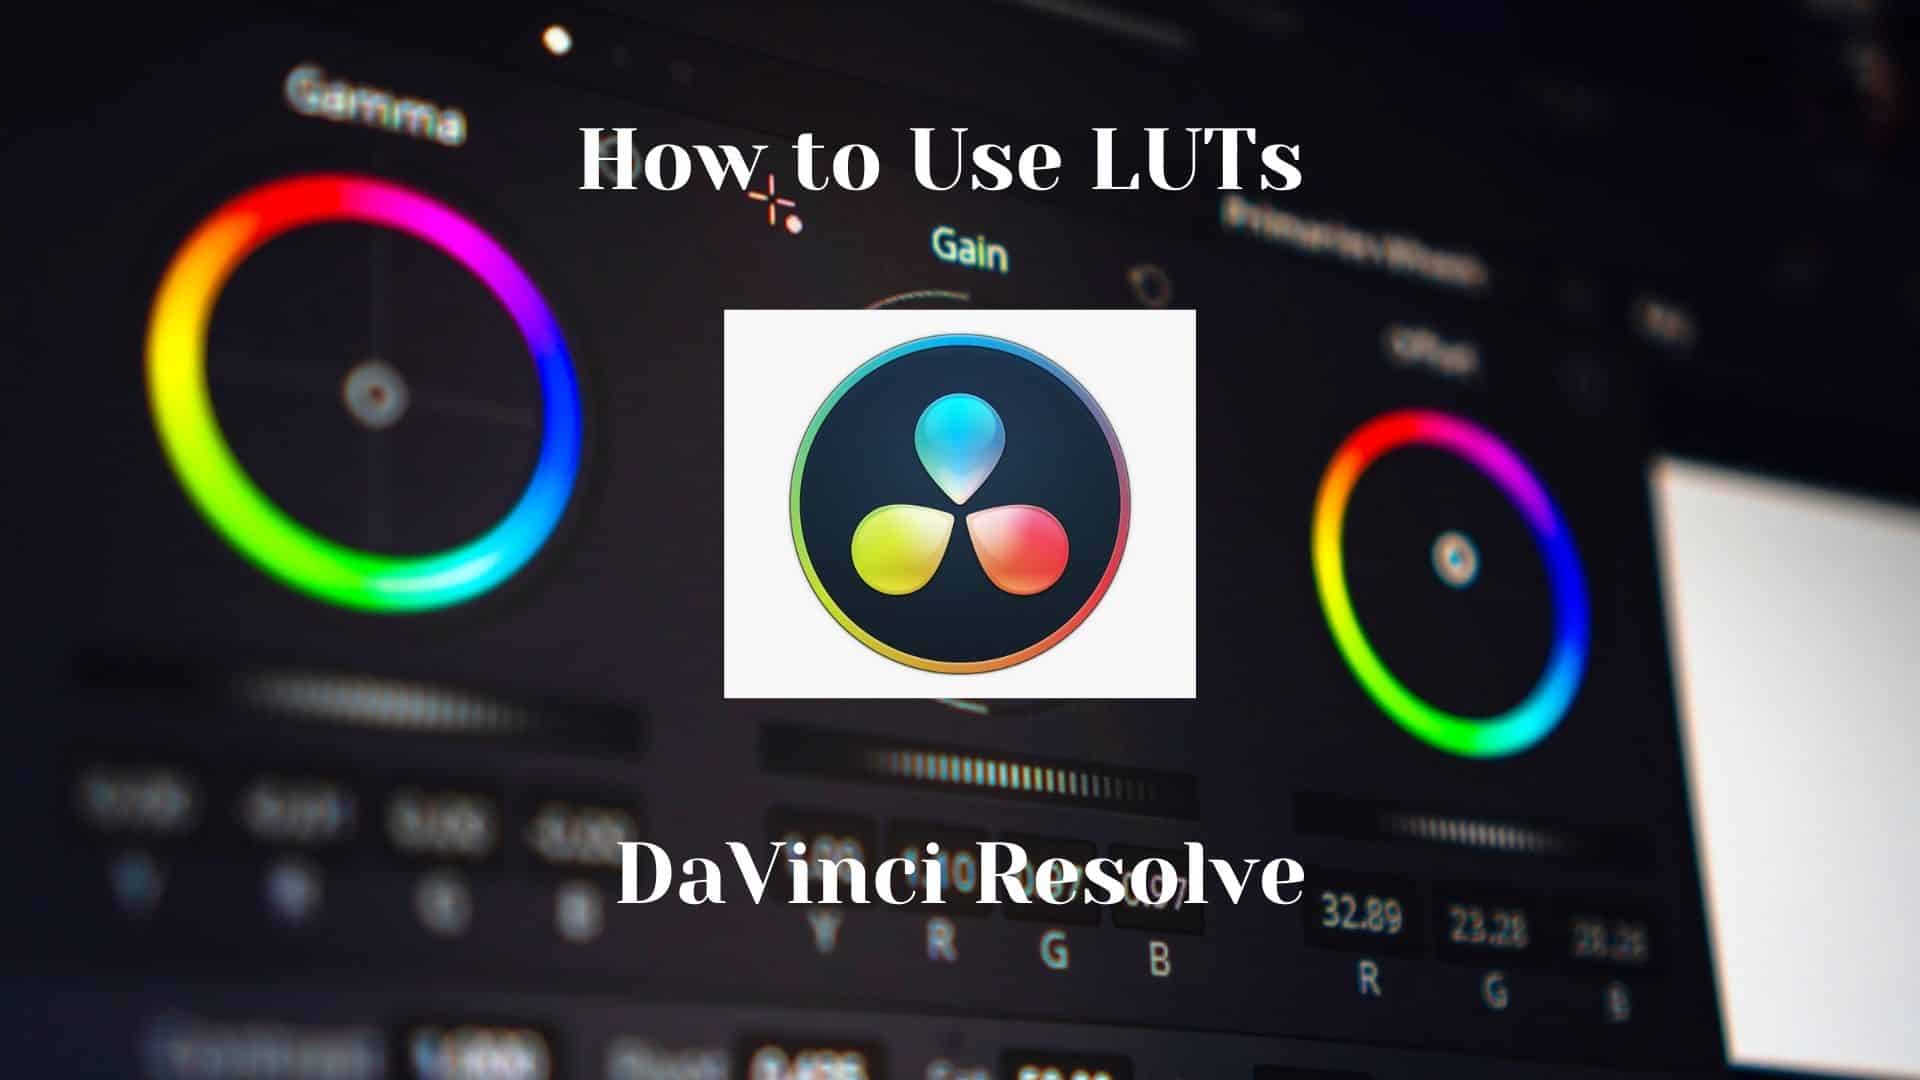 How to Use LUTs in DaVinci Resolve